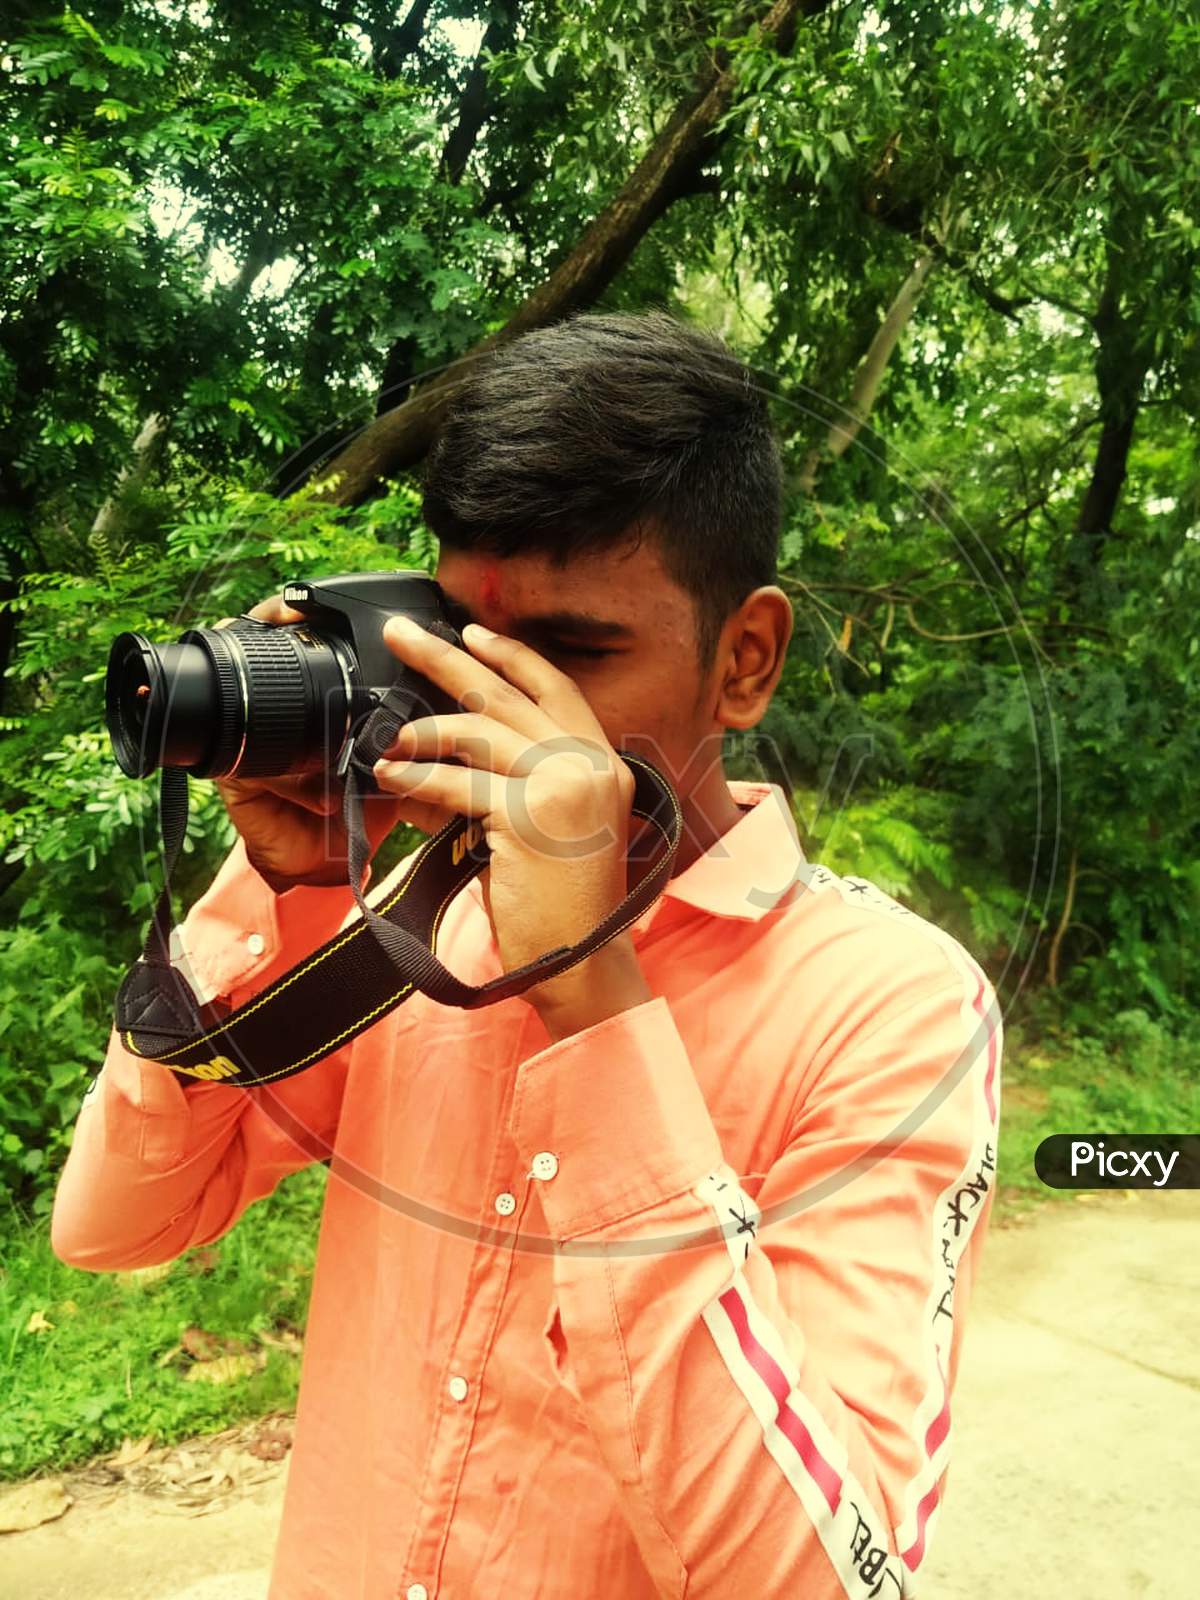 In photography there is a reality so subtle that it becomes more real than reality.” ...